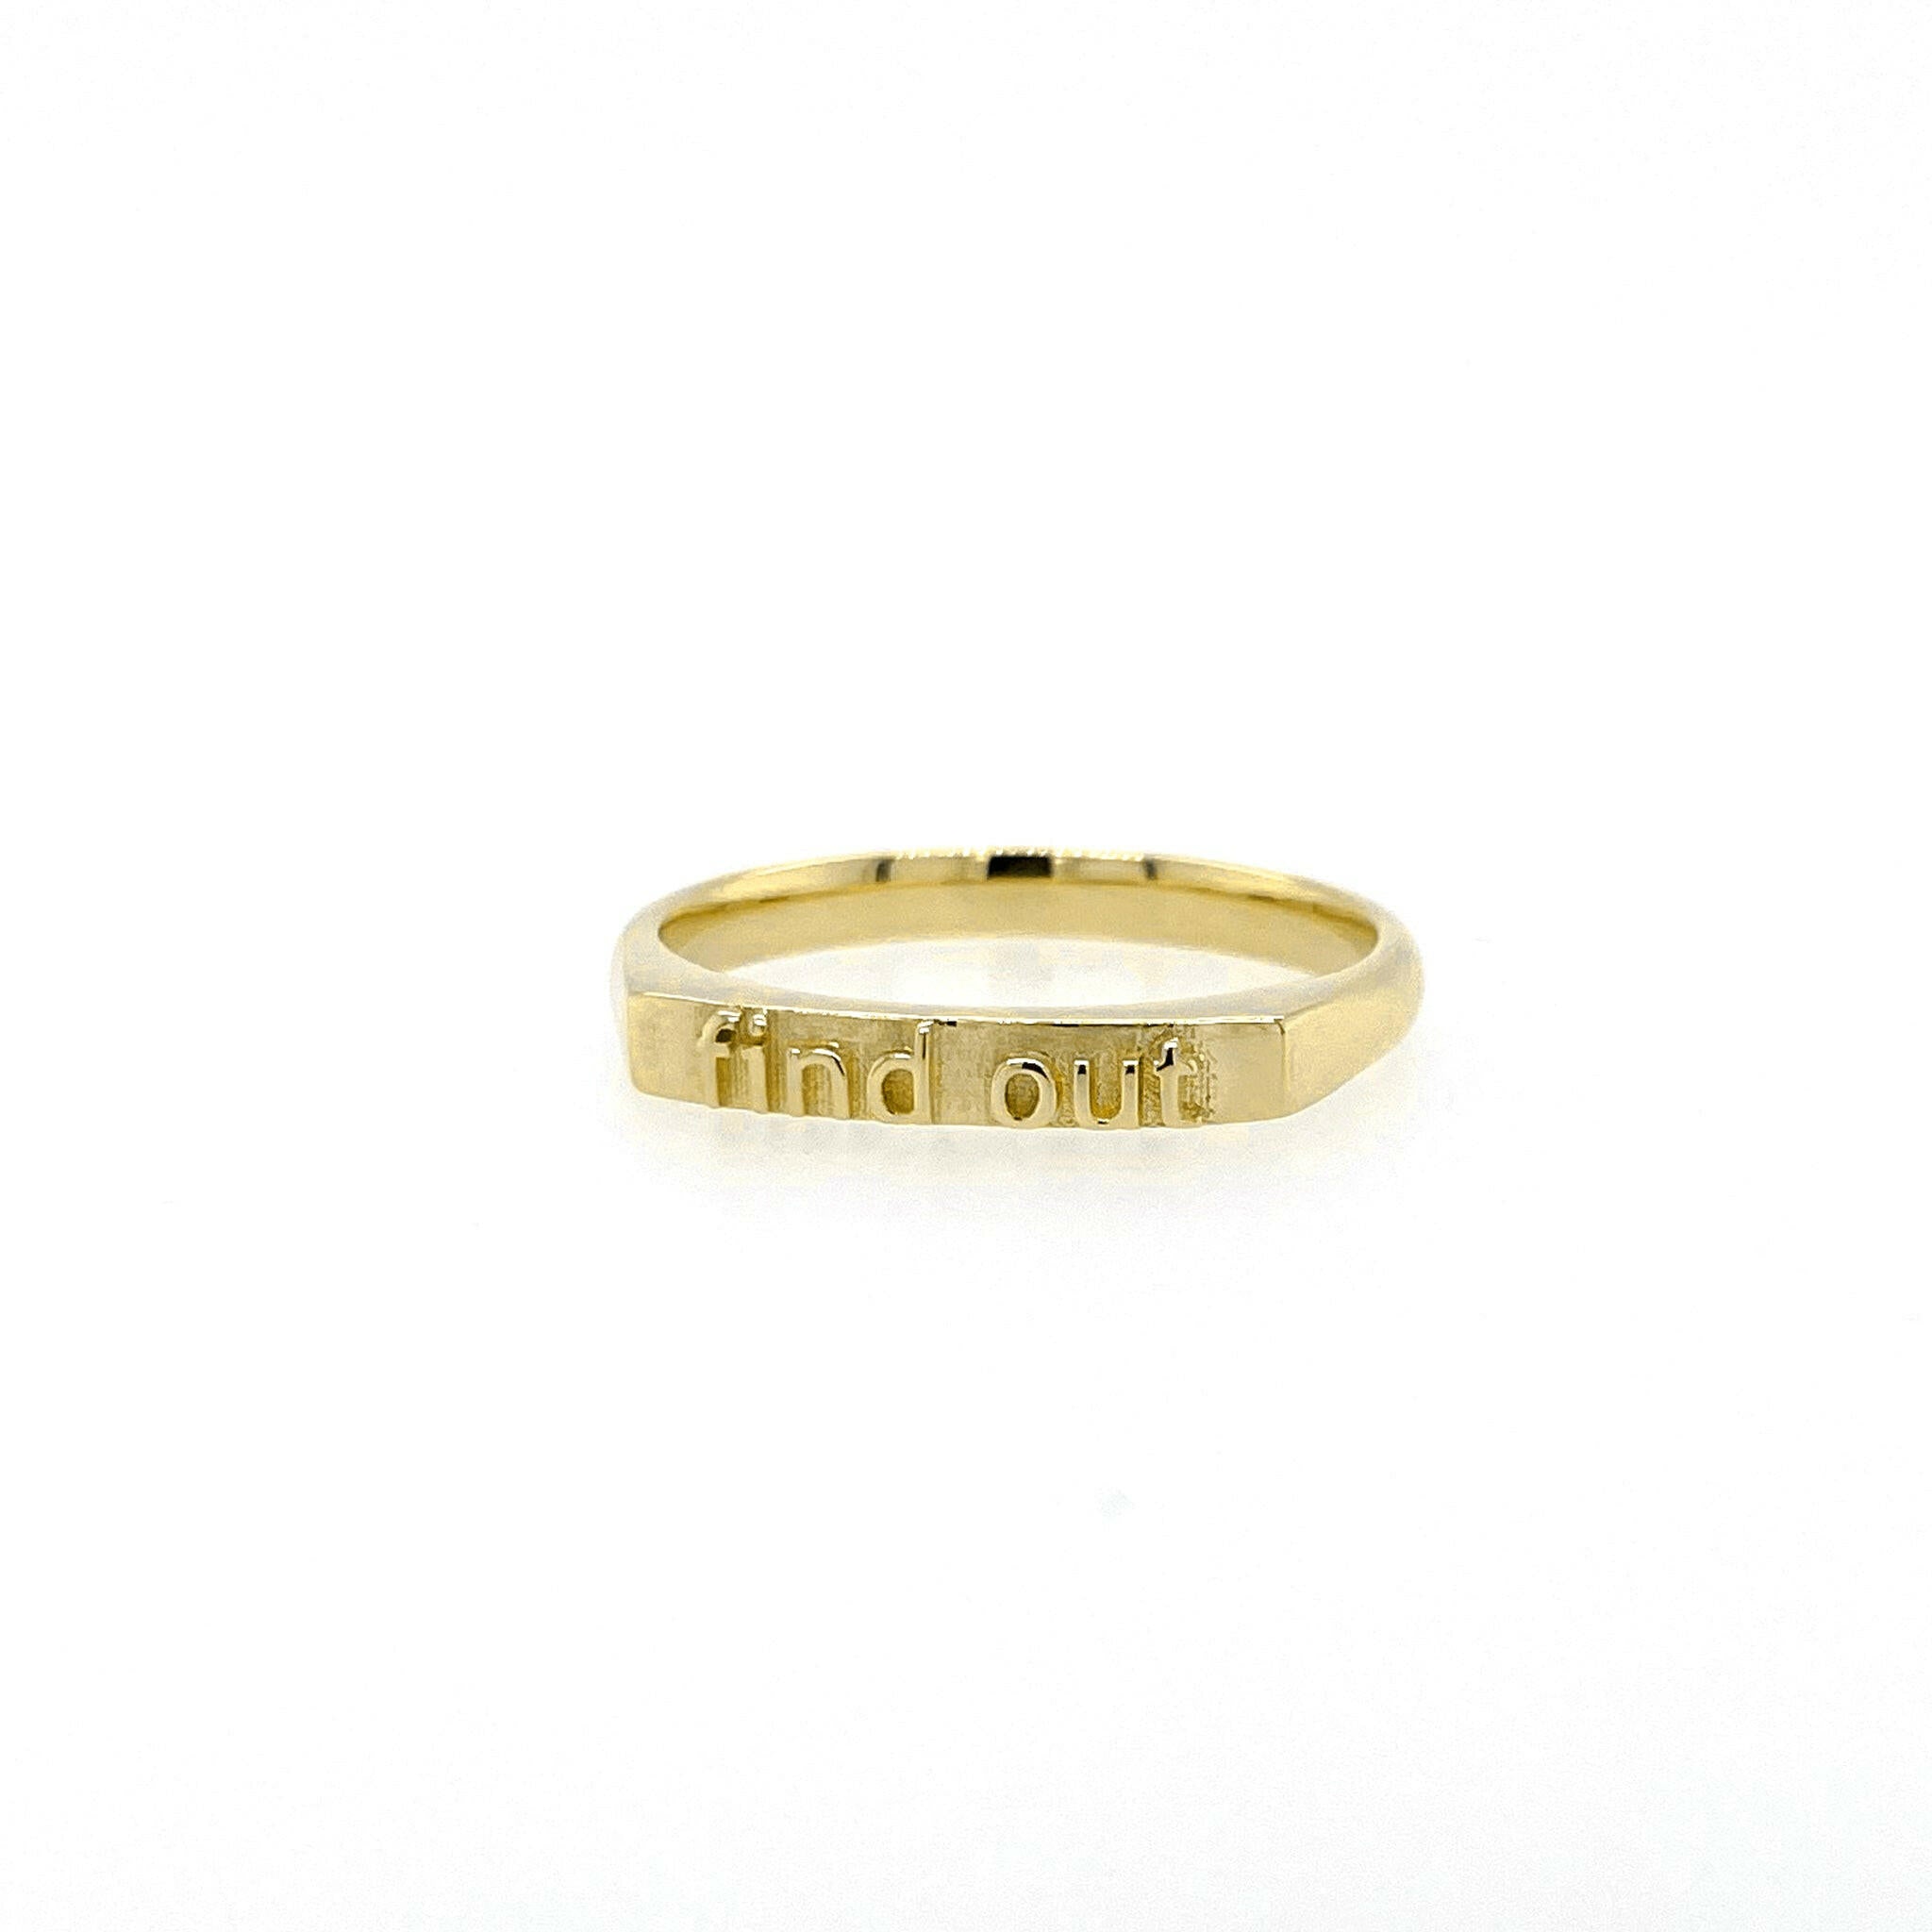 front view of 14 karat yellow gold ring with text saying "find out"